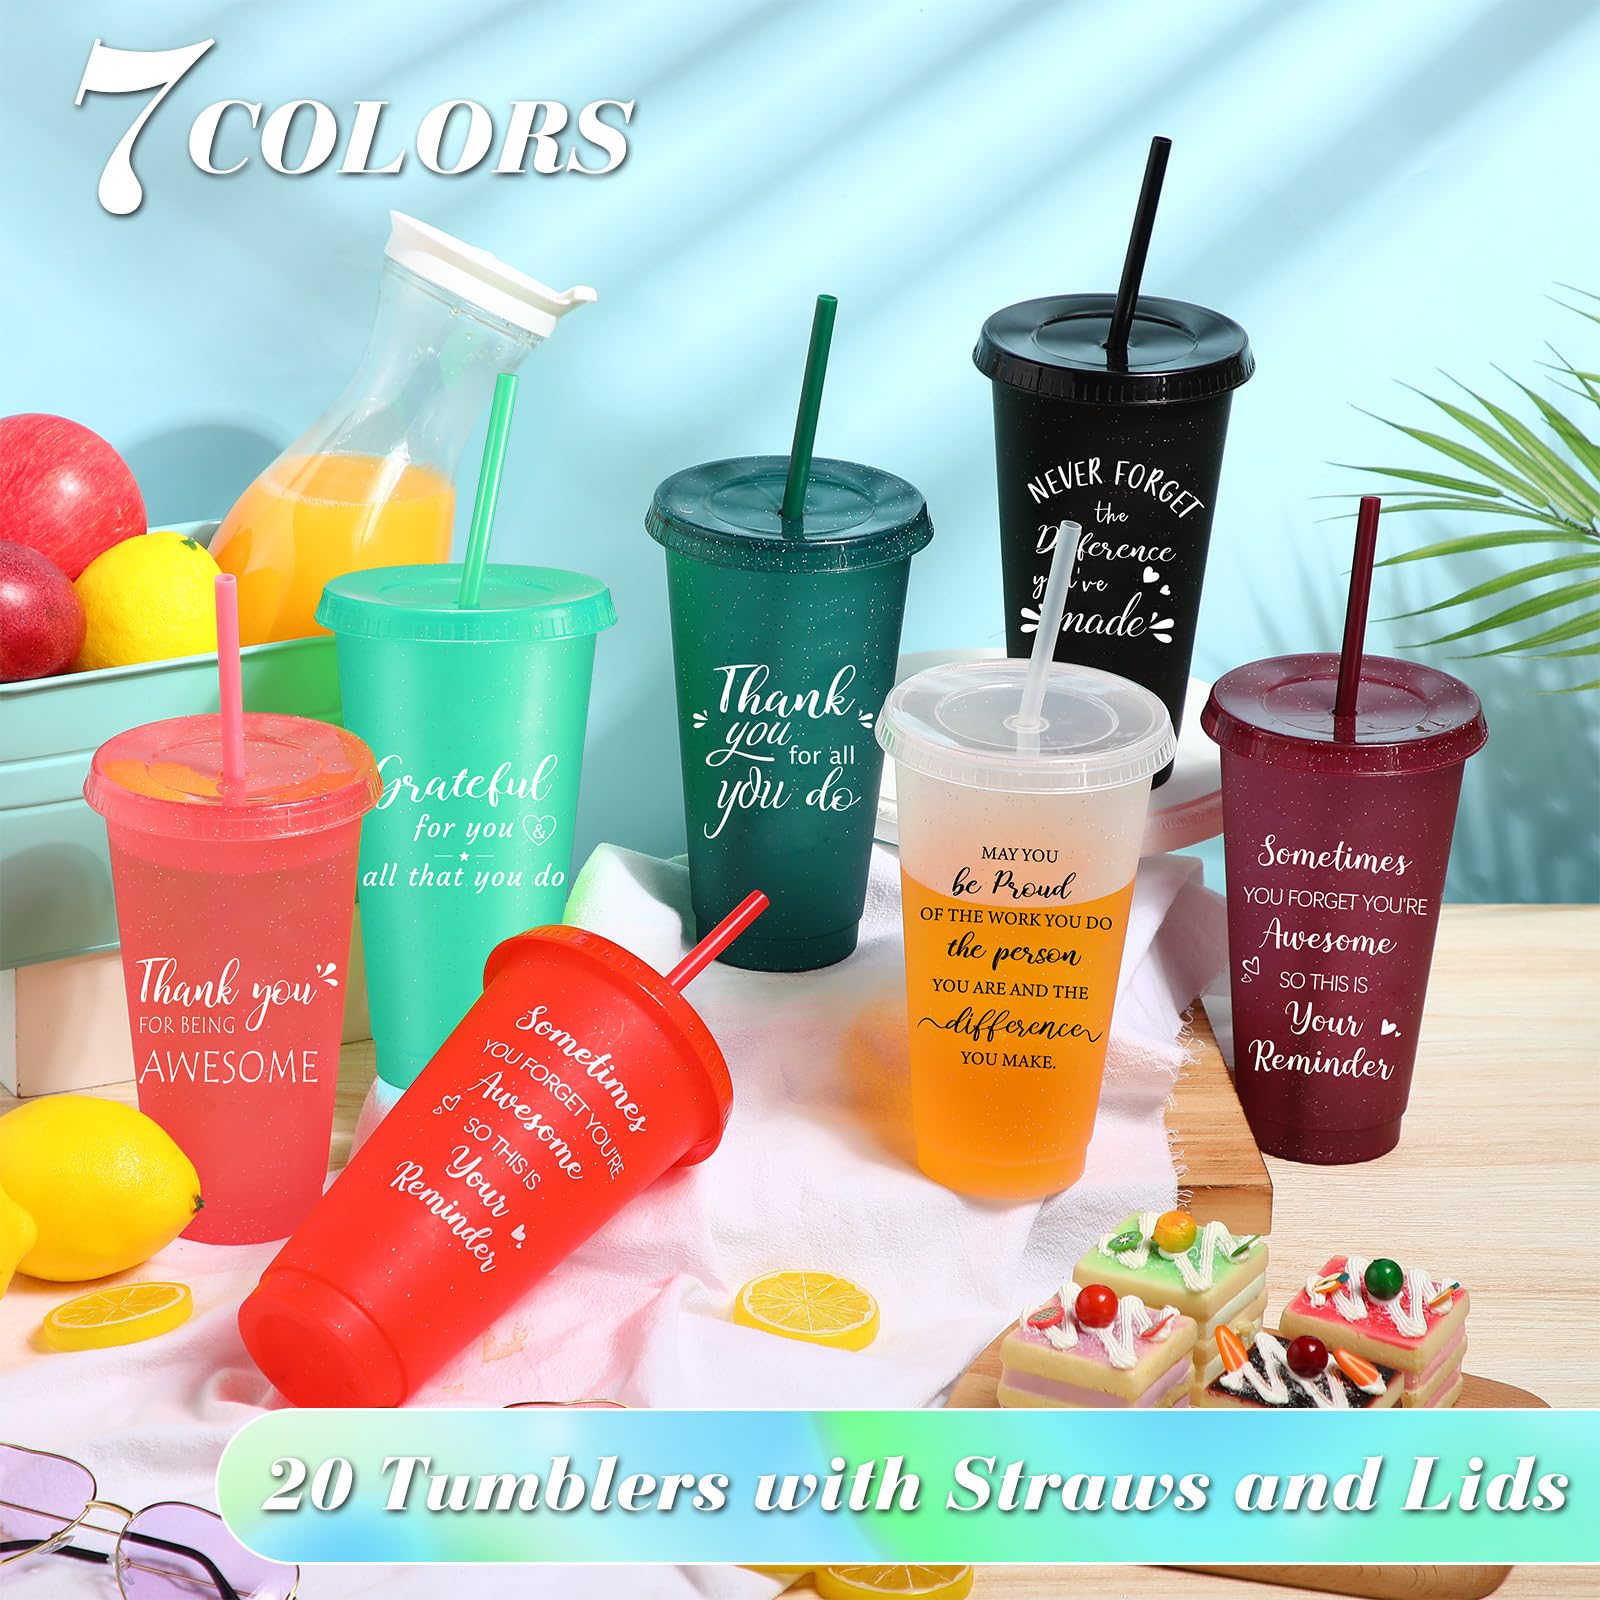 Zhehao 20 Pcs Thank You Cup Tumblers Employee Appreciation Gifts Bulk, 24 oz Plastic Coffee Cups with Straws and Lids, Team Gifts for Staff Coworker Friends(Bright Colors)